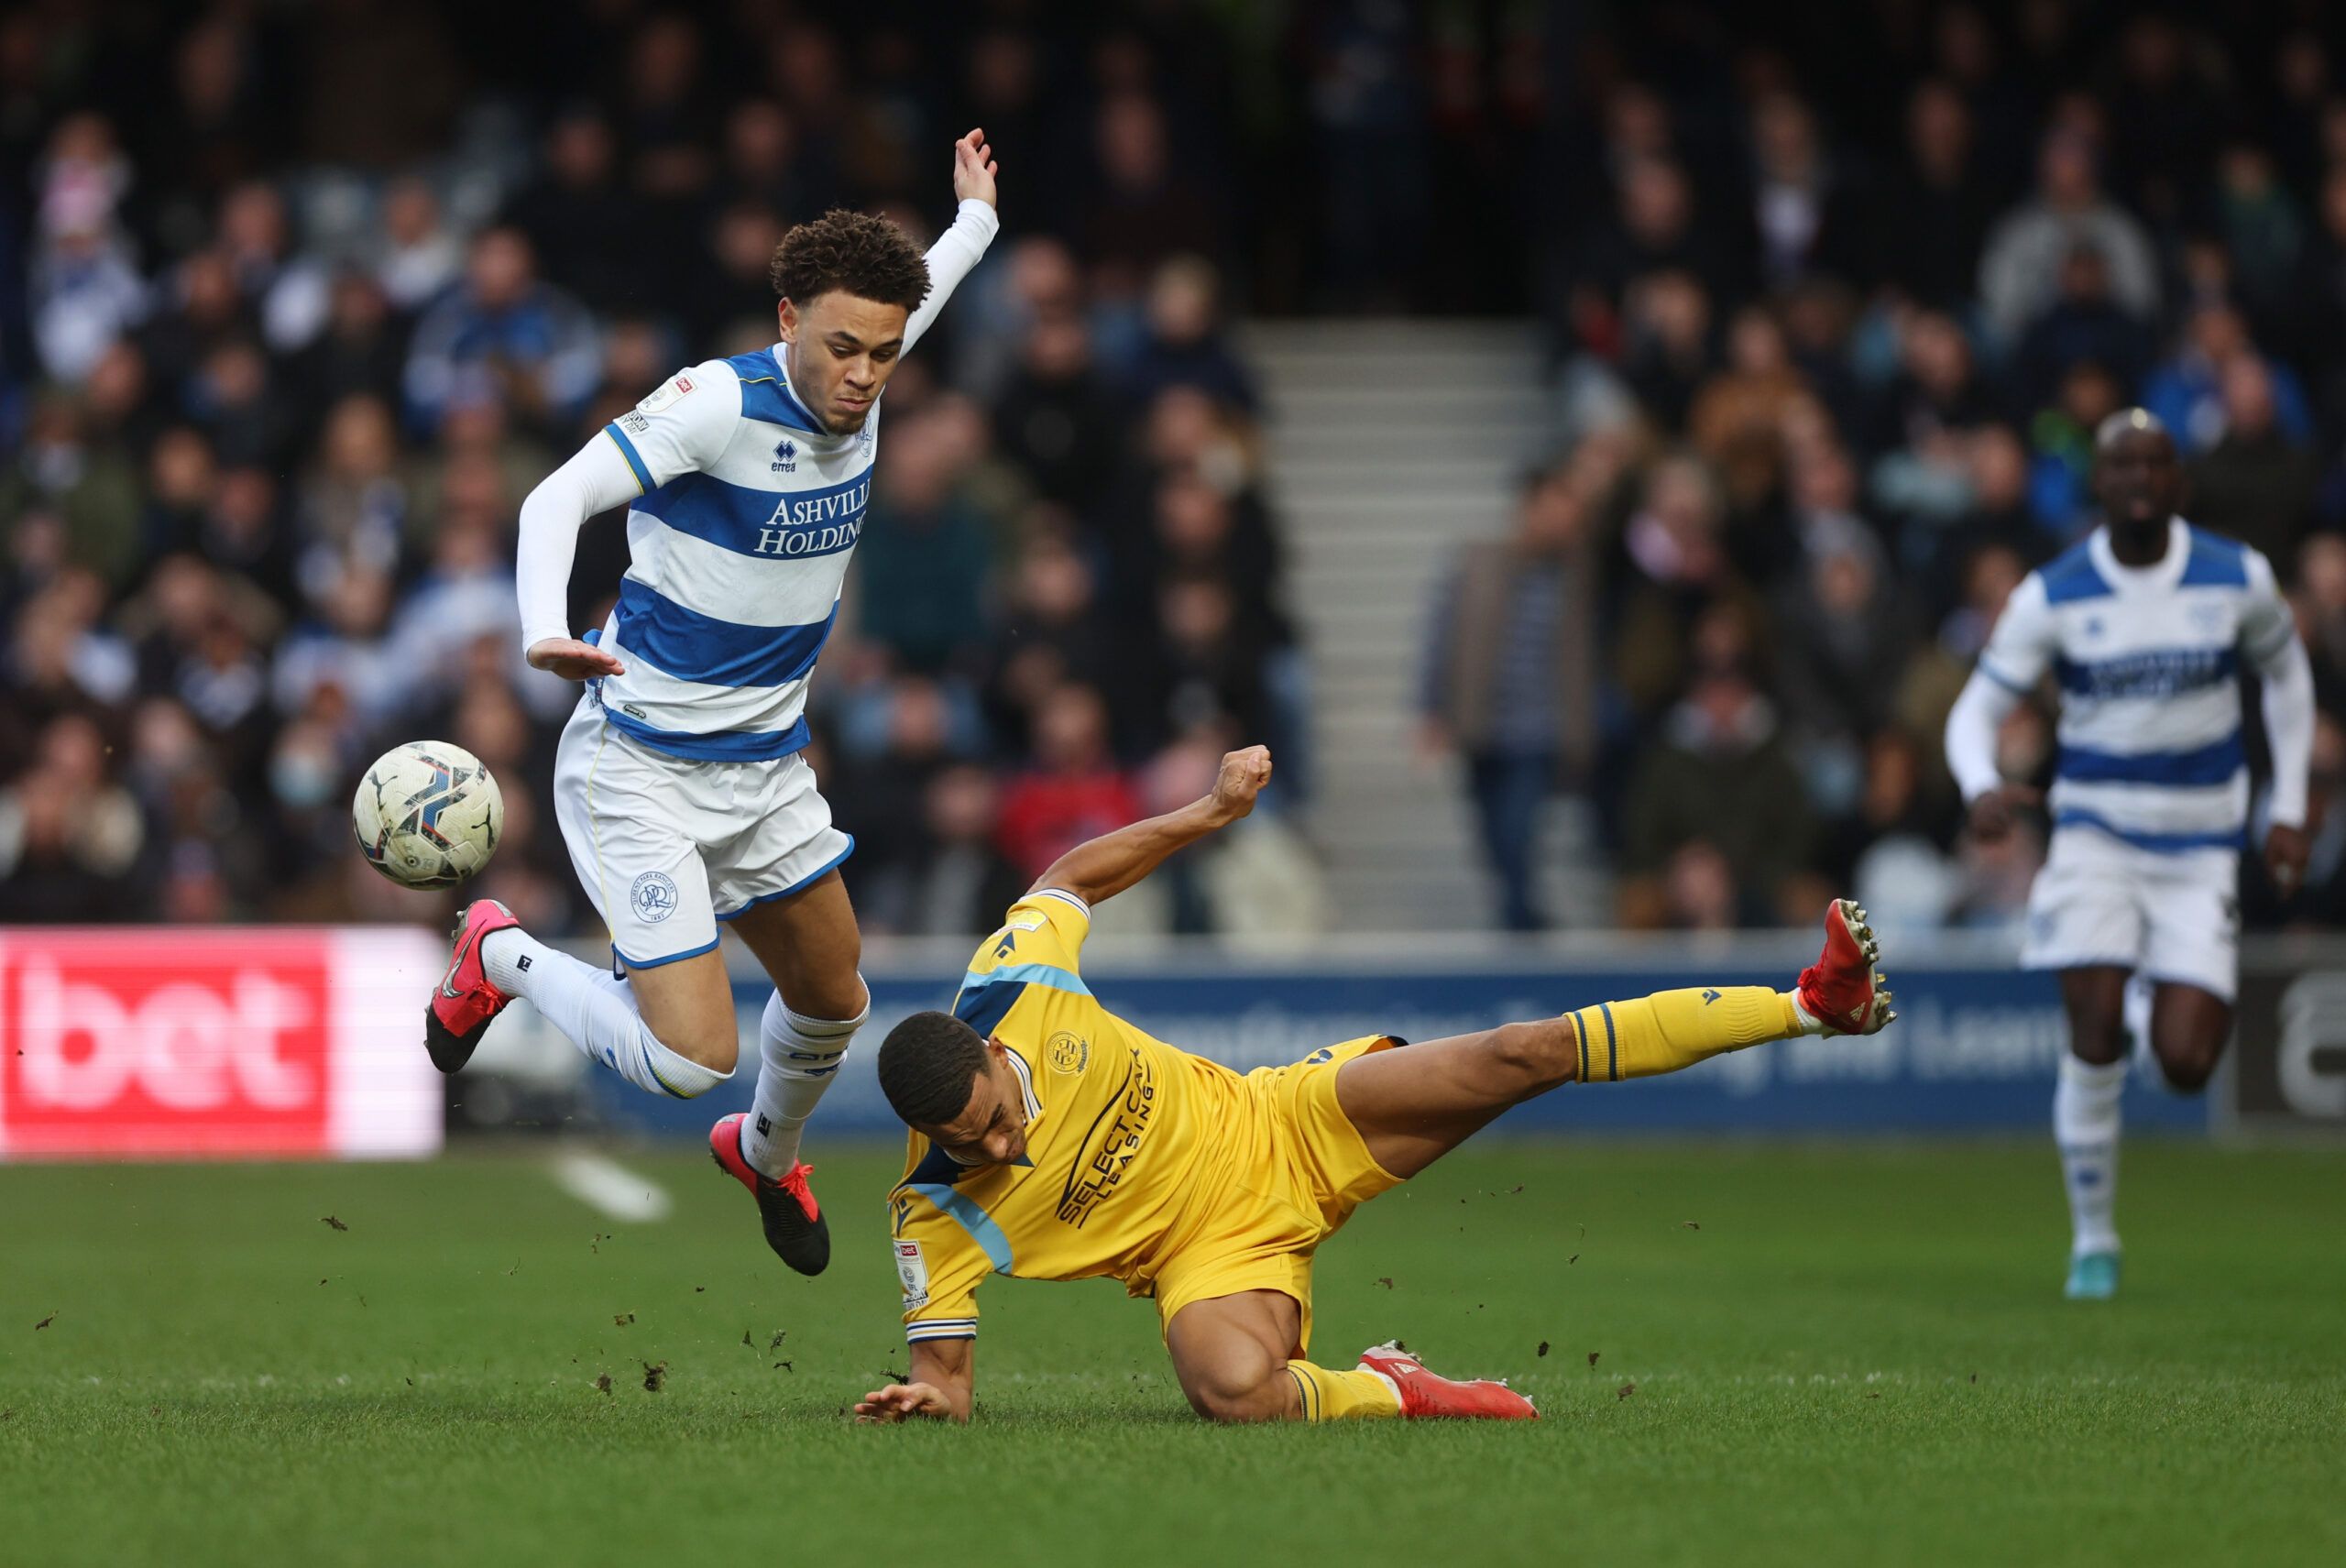 Soccer Football - Championship - Queens Park Rangers v Reading - Loftus Road, London, Britain - January 29, 2022 Queens Park Rangers' Luke Amos in action with Reading's Andy Rinomhota Action Images/Matthew Childs EDITORIAL USE ONLY. No use with unauthorized audio, video, data, fixture lists, club/league logos or 'live' services. Online in-match use limited to 75 images, no video emulation. No use in betting, games or single club /league/player publications.  Please contact your account represent